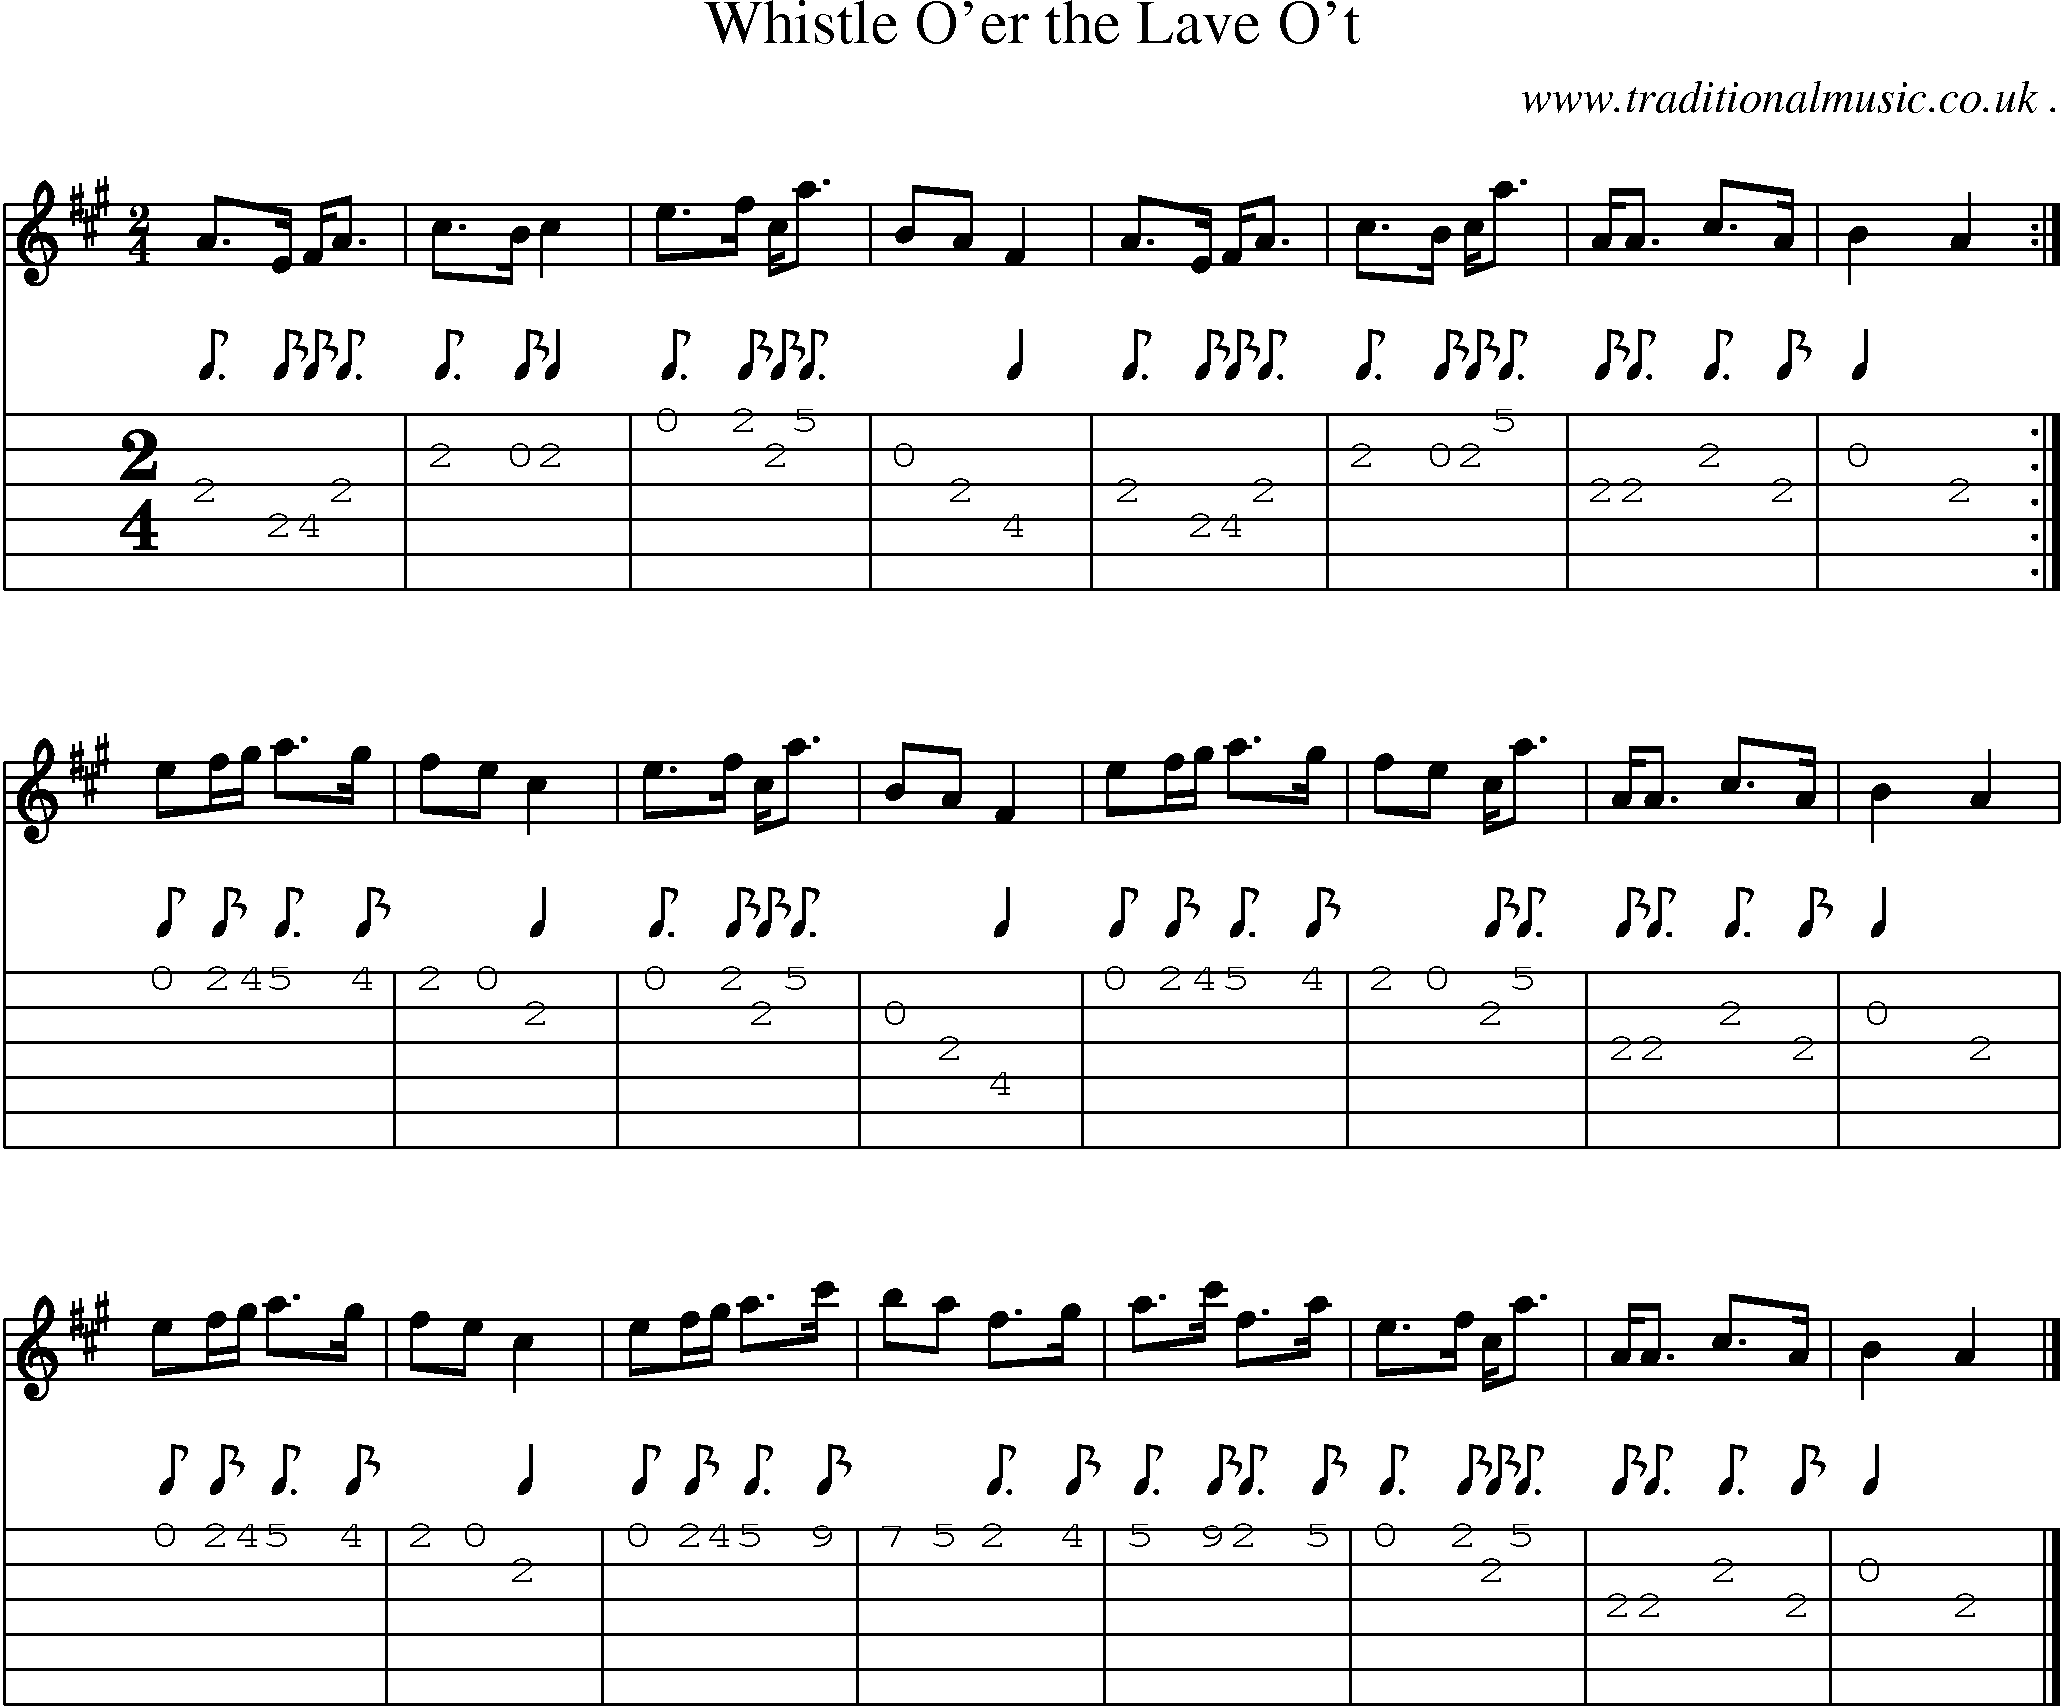 Sheet-music  score, Chords and Guitar Tabs for Whistle Oer The Lave Ot